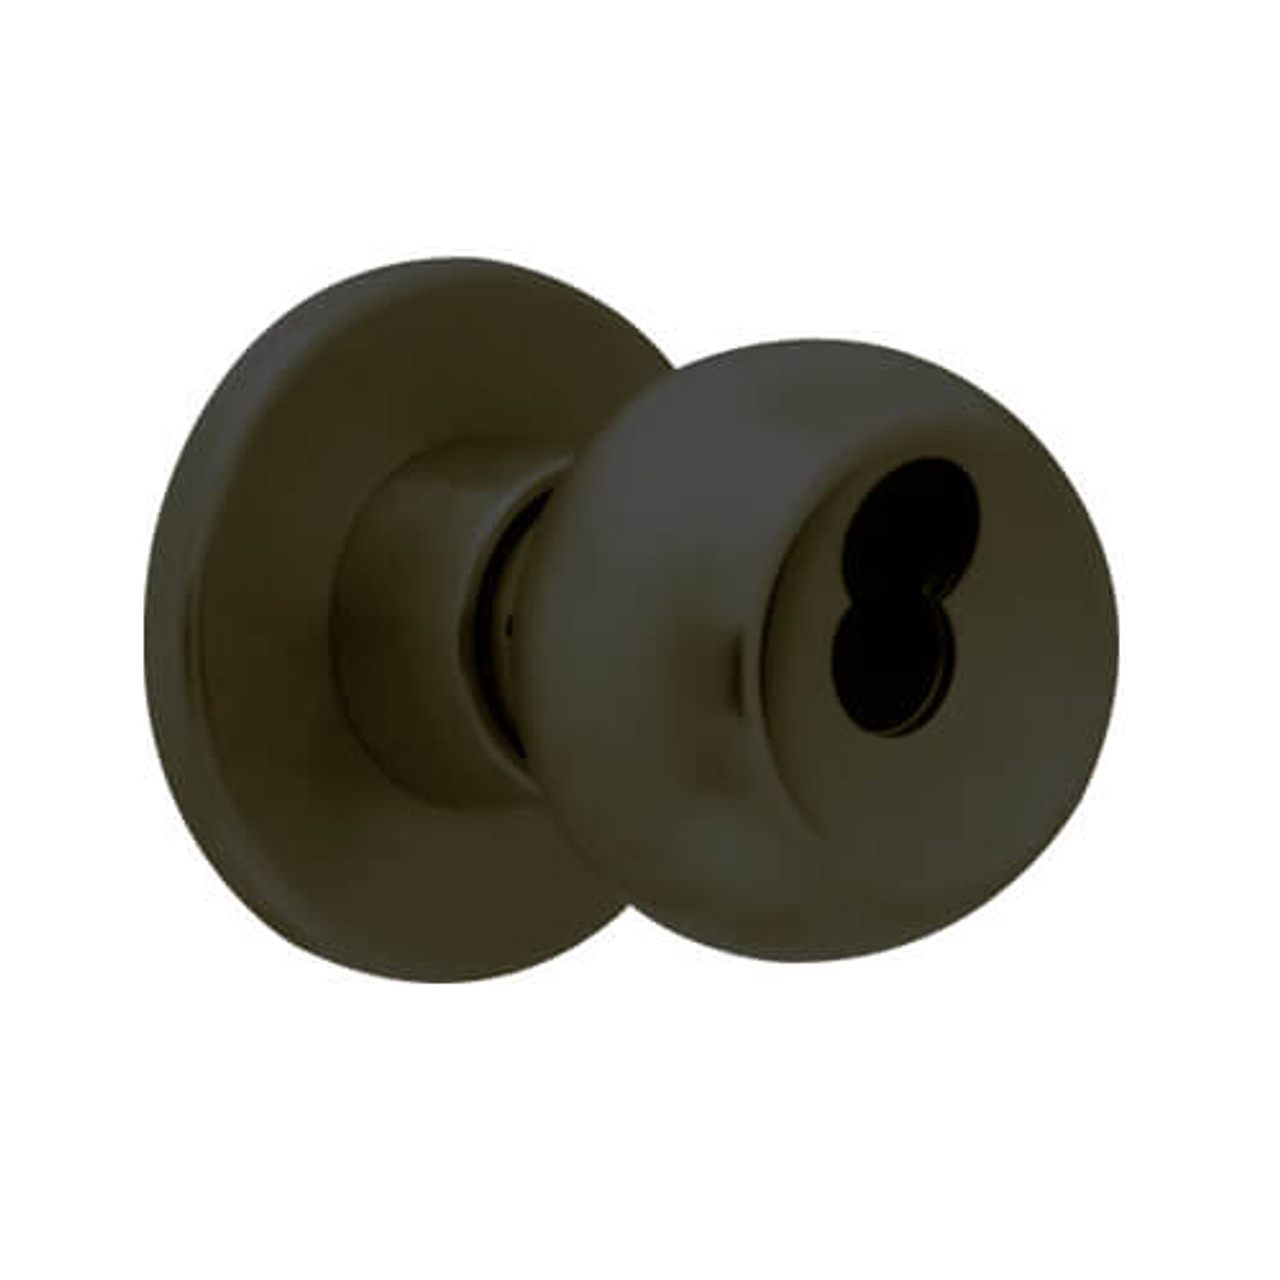 X571BD-TG-613 Falcon X Series Cylindrical Dormitory Lock with Troy-Gala Knob Style in Oil Rubbed Bronze Finish